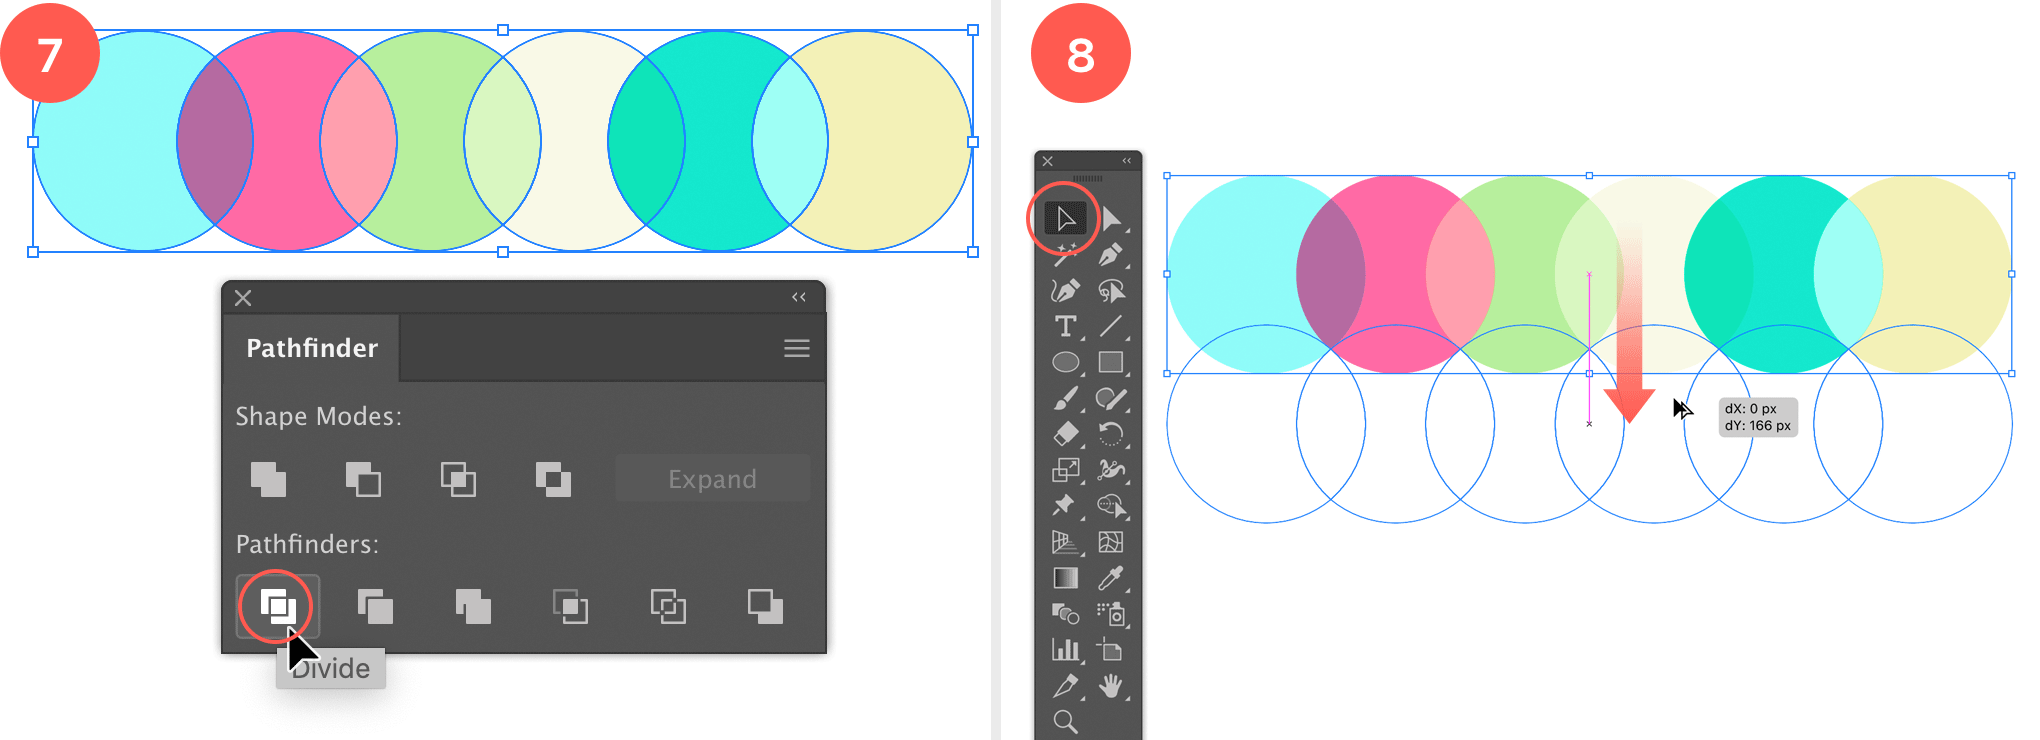 Divide the circles into separate objects and duplicate all the circles while moving them vertically down.